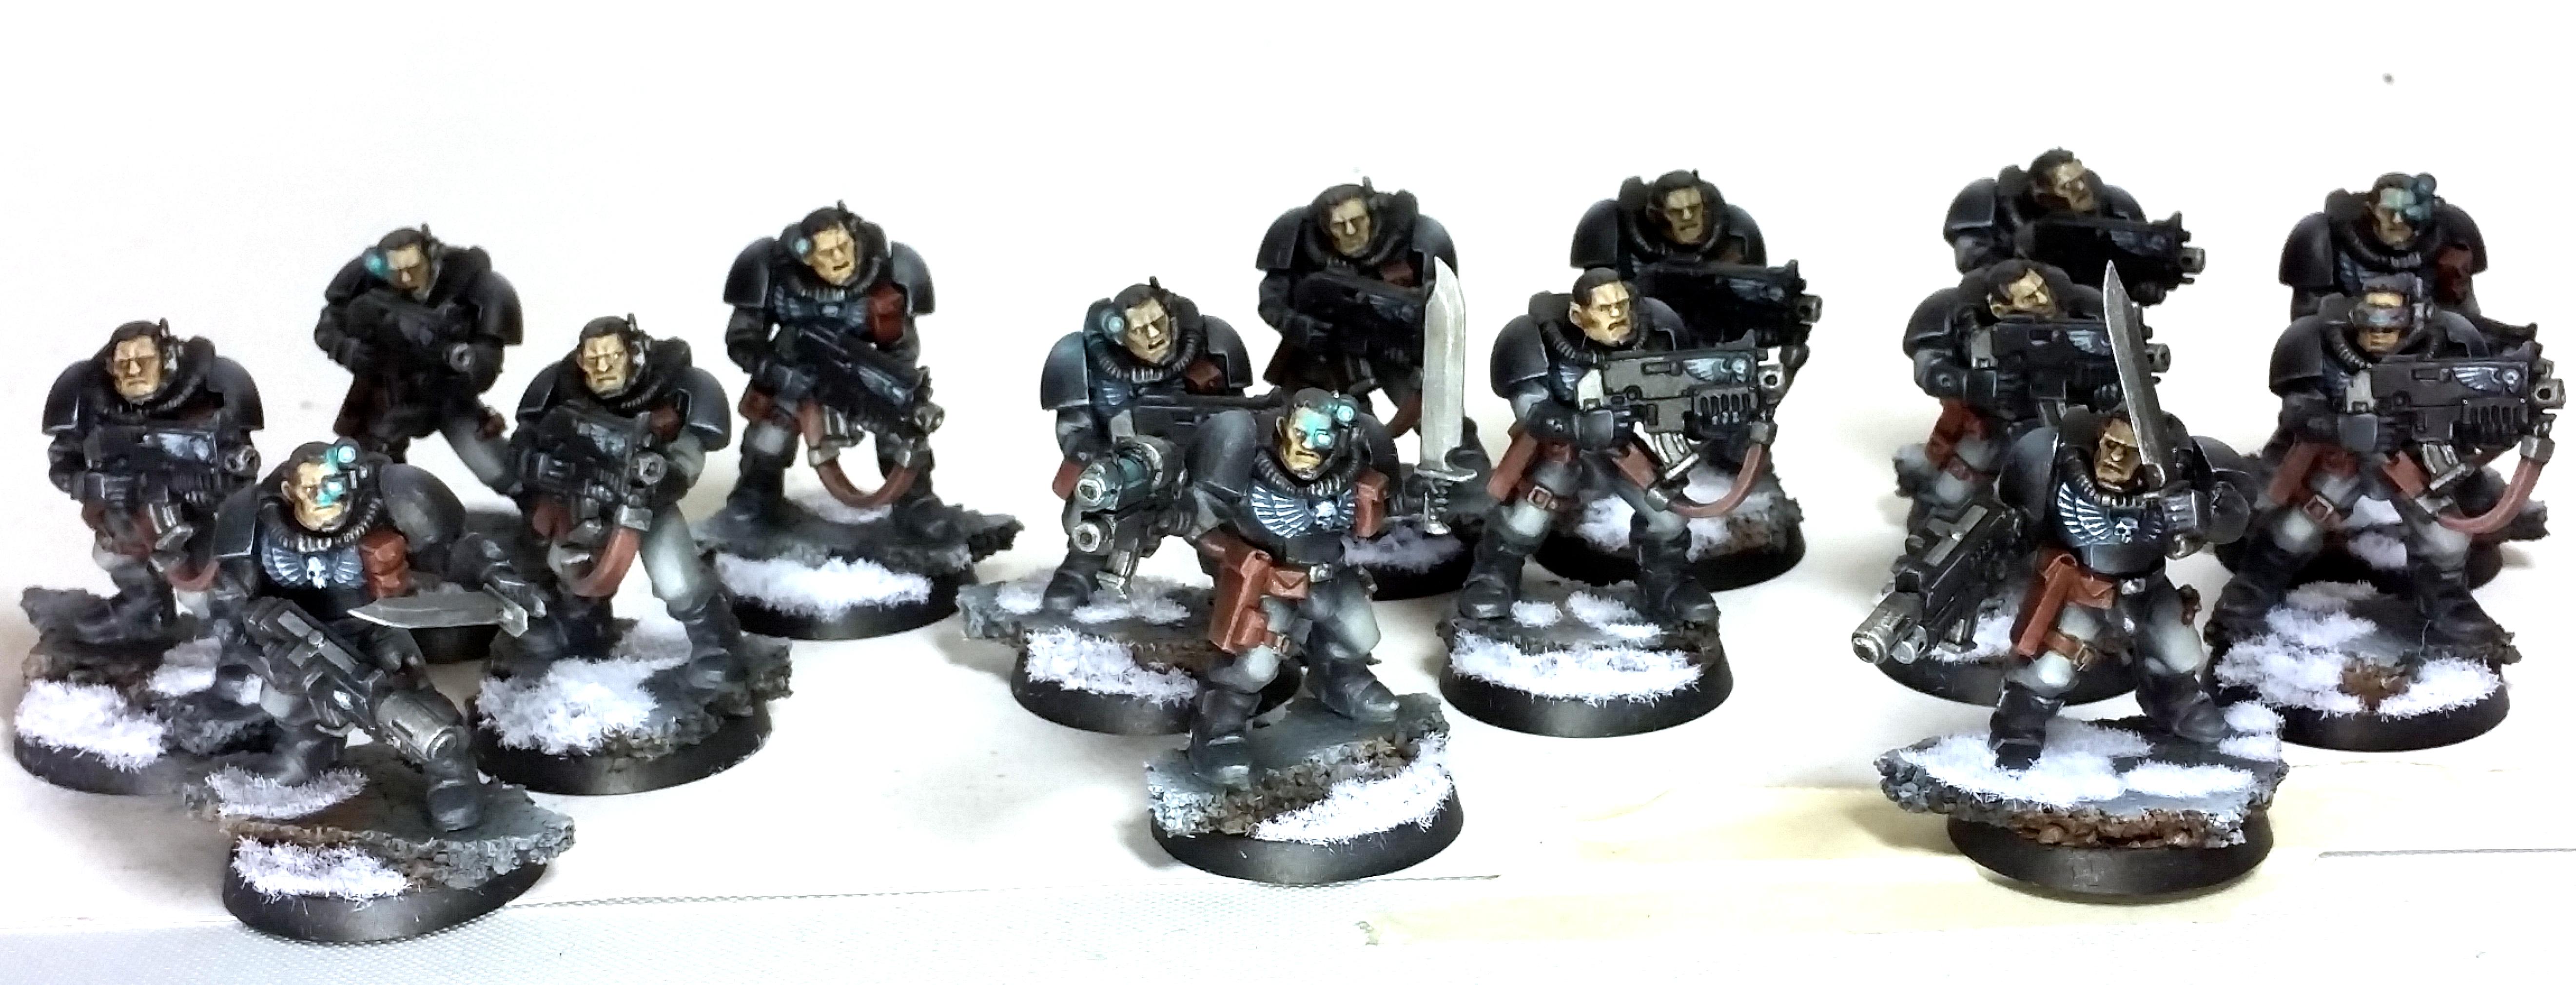 Black, Scouts, Snow, Space Marines